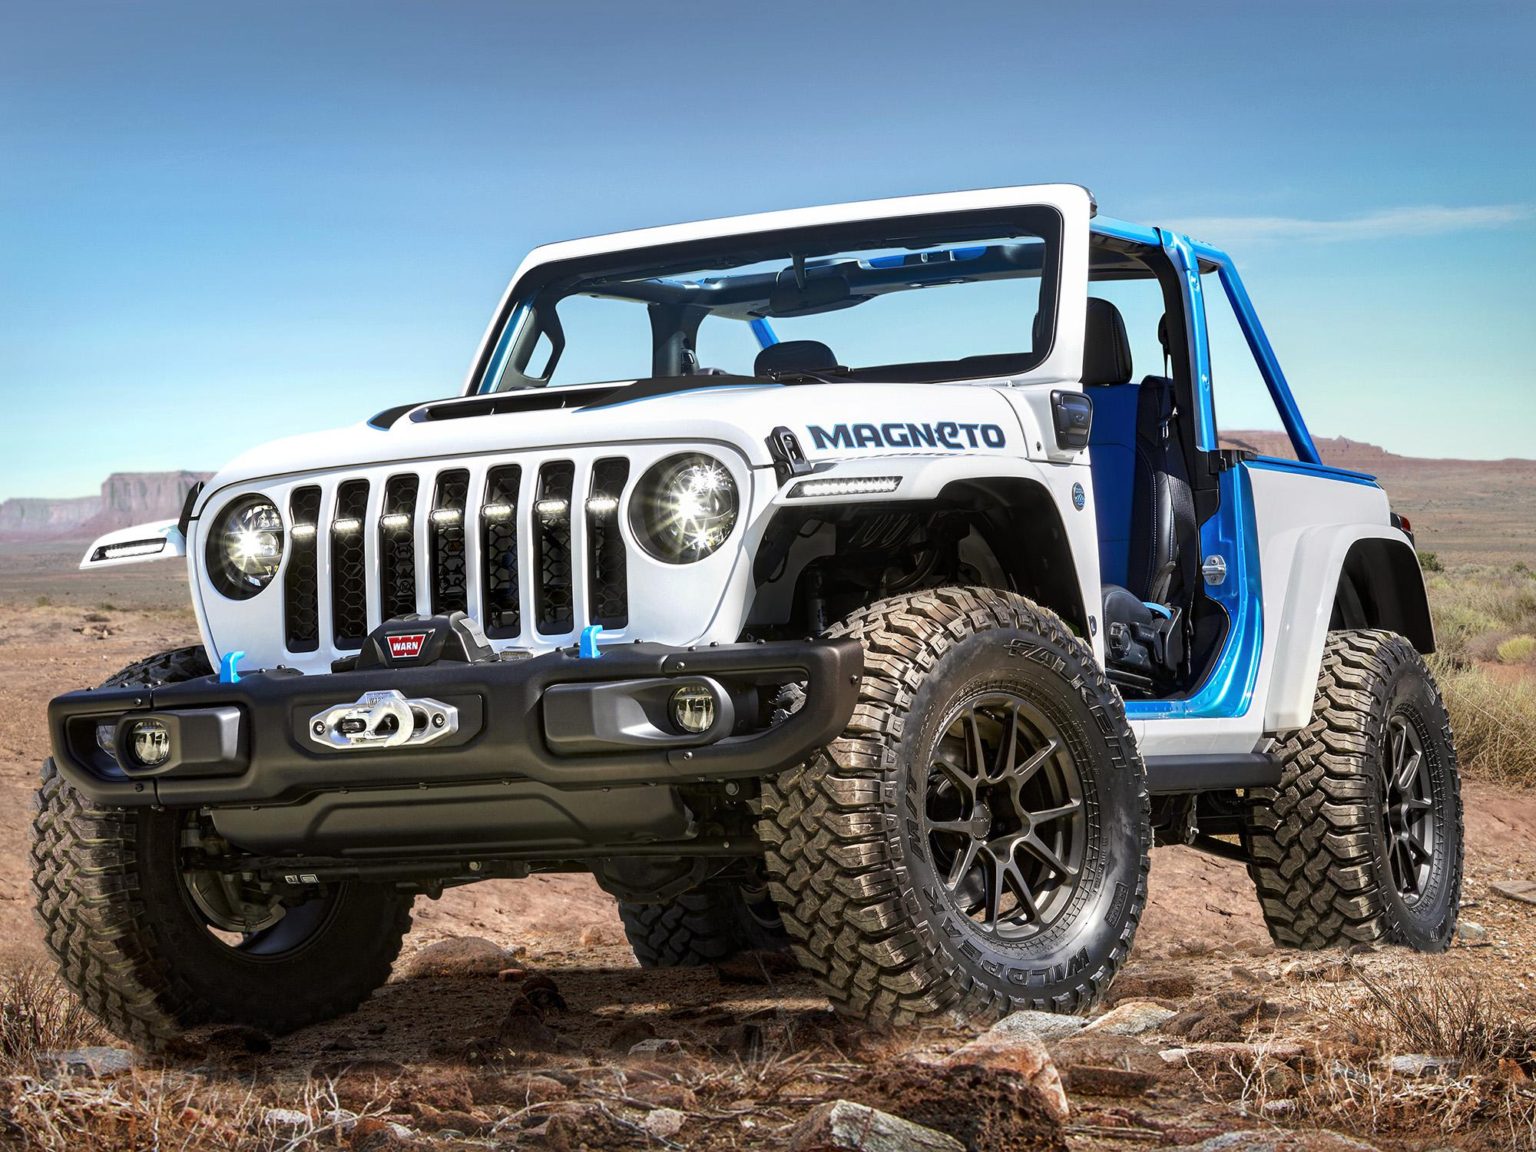 The Jeep Magneto concept has arrived in Moab.